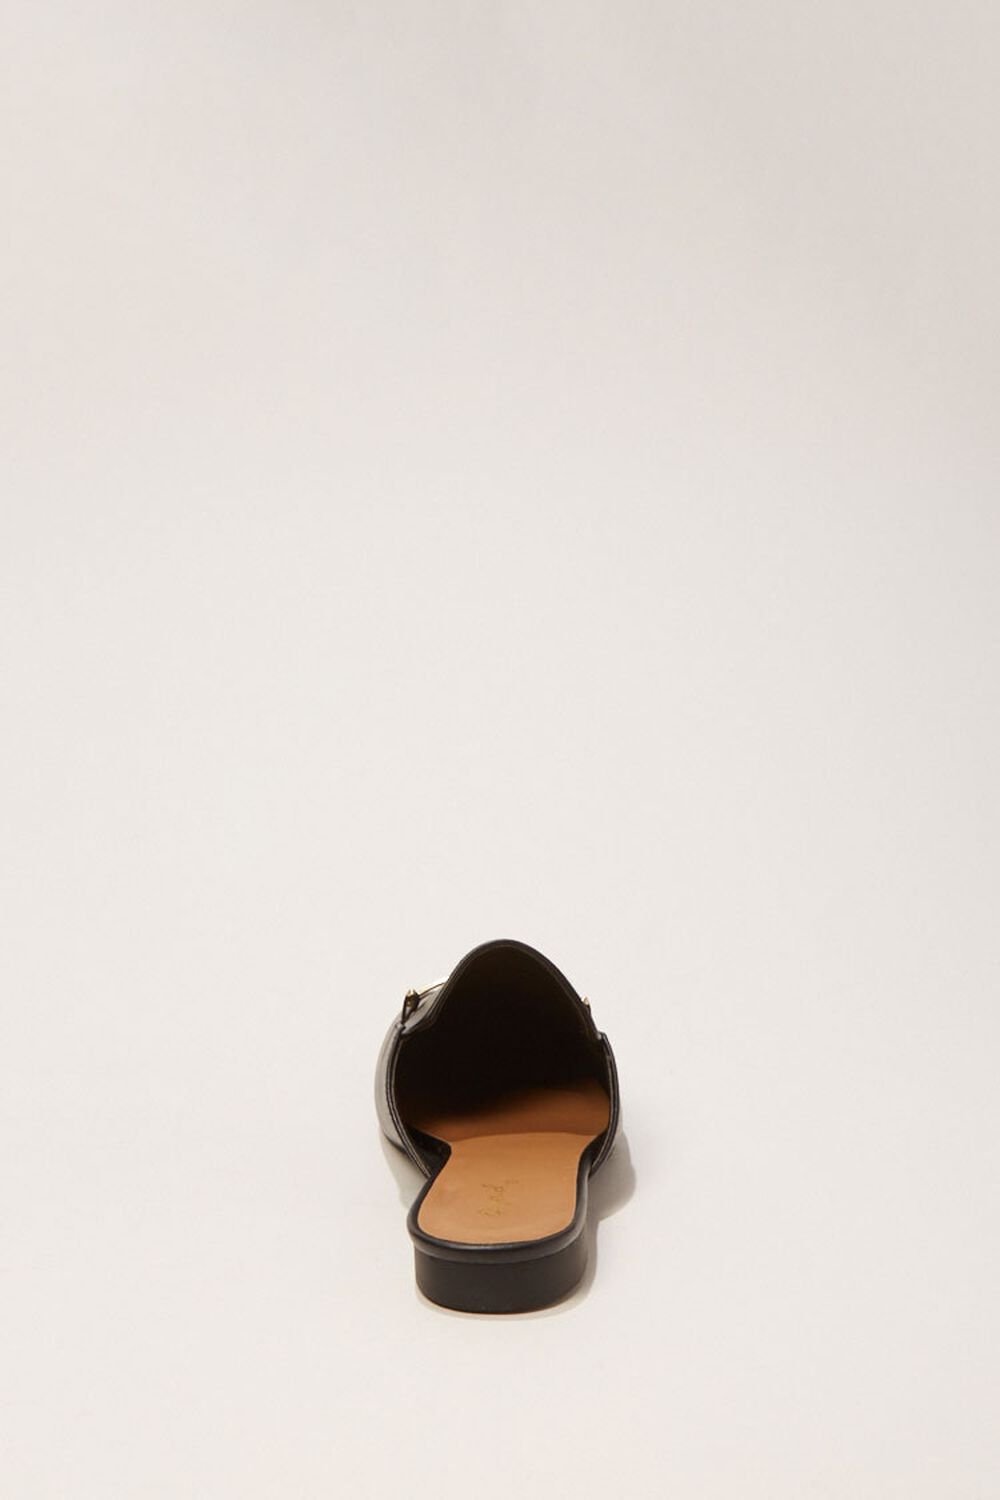 BLACK Faux Leather Loafer Mules, image 2